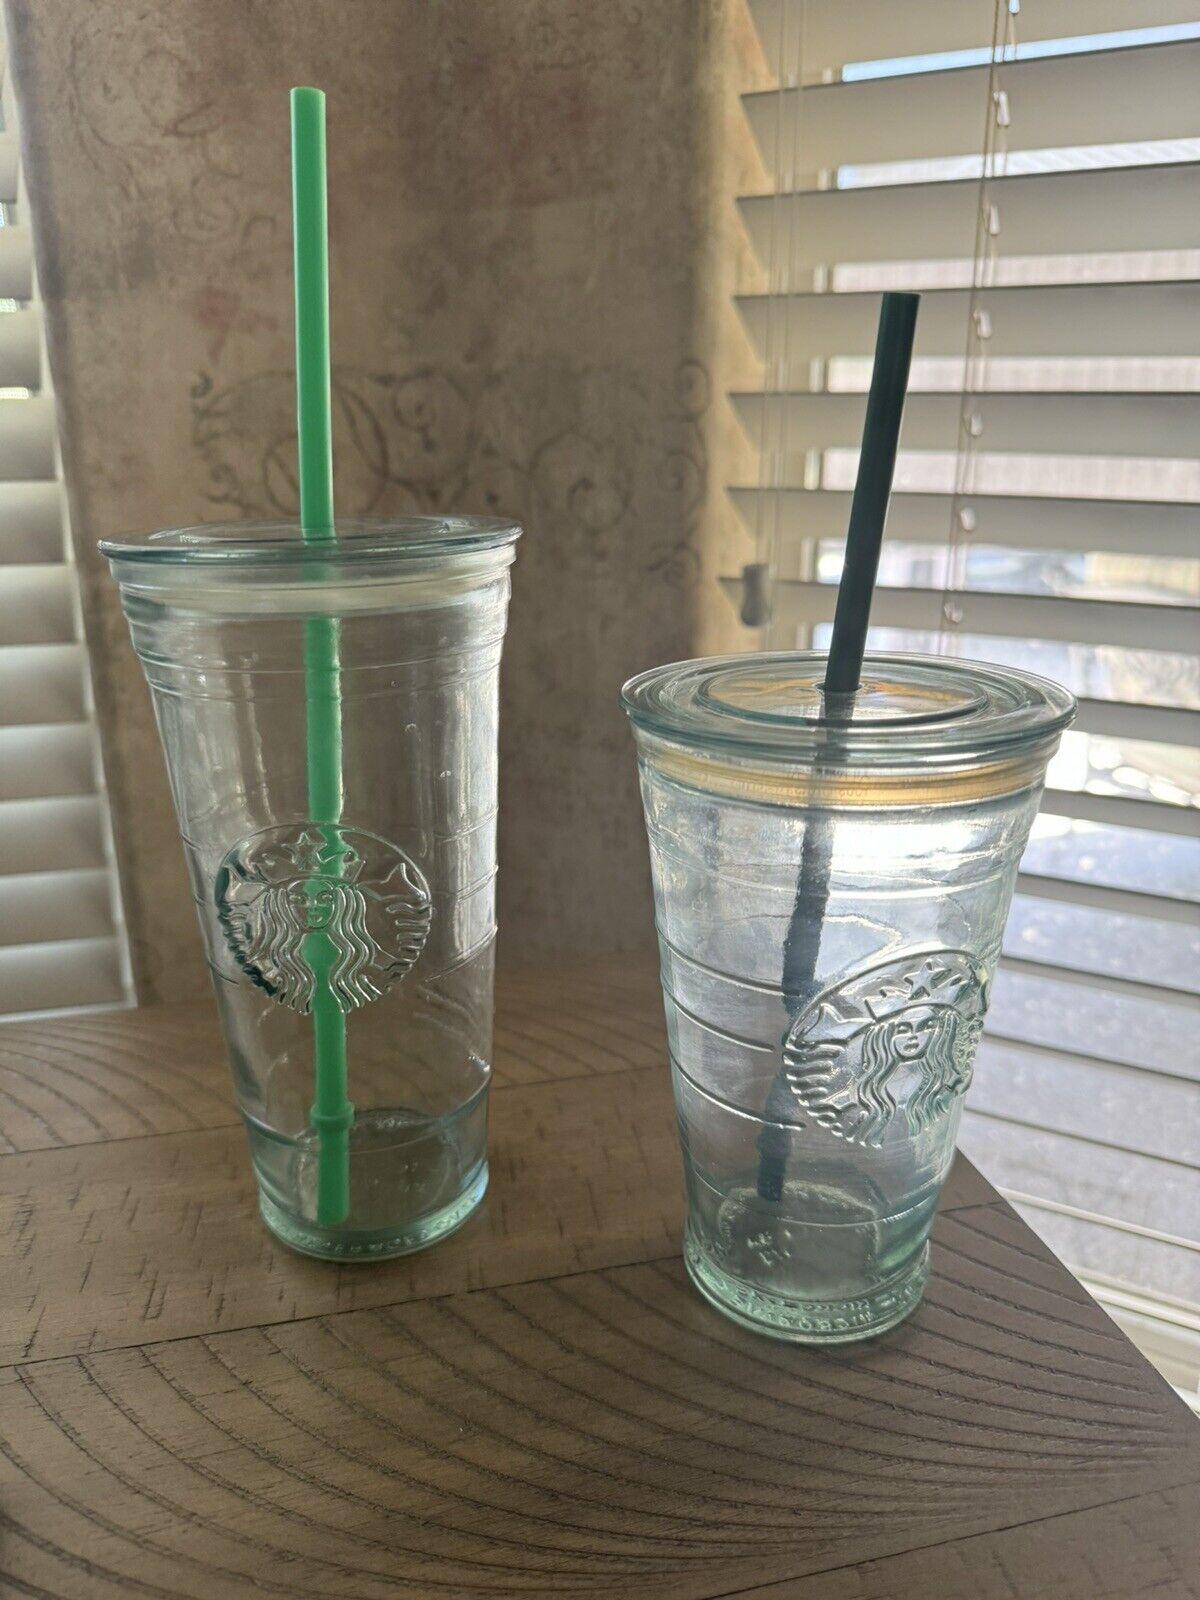 2 Starbucks Recycled Glass 16oz & 20oz. Including Lids & Straws. Made In Spain.